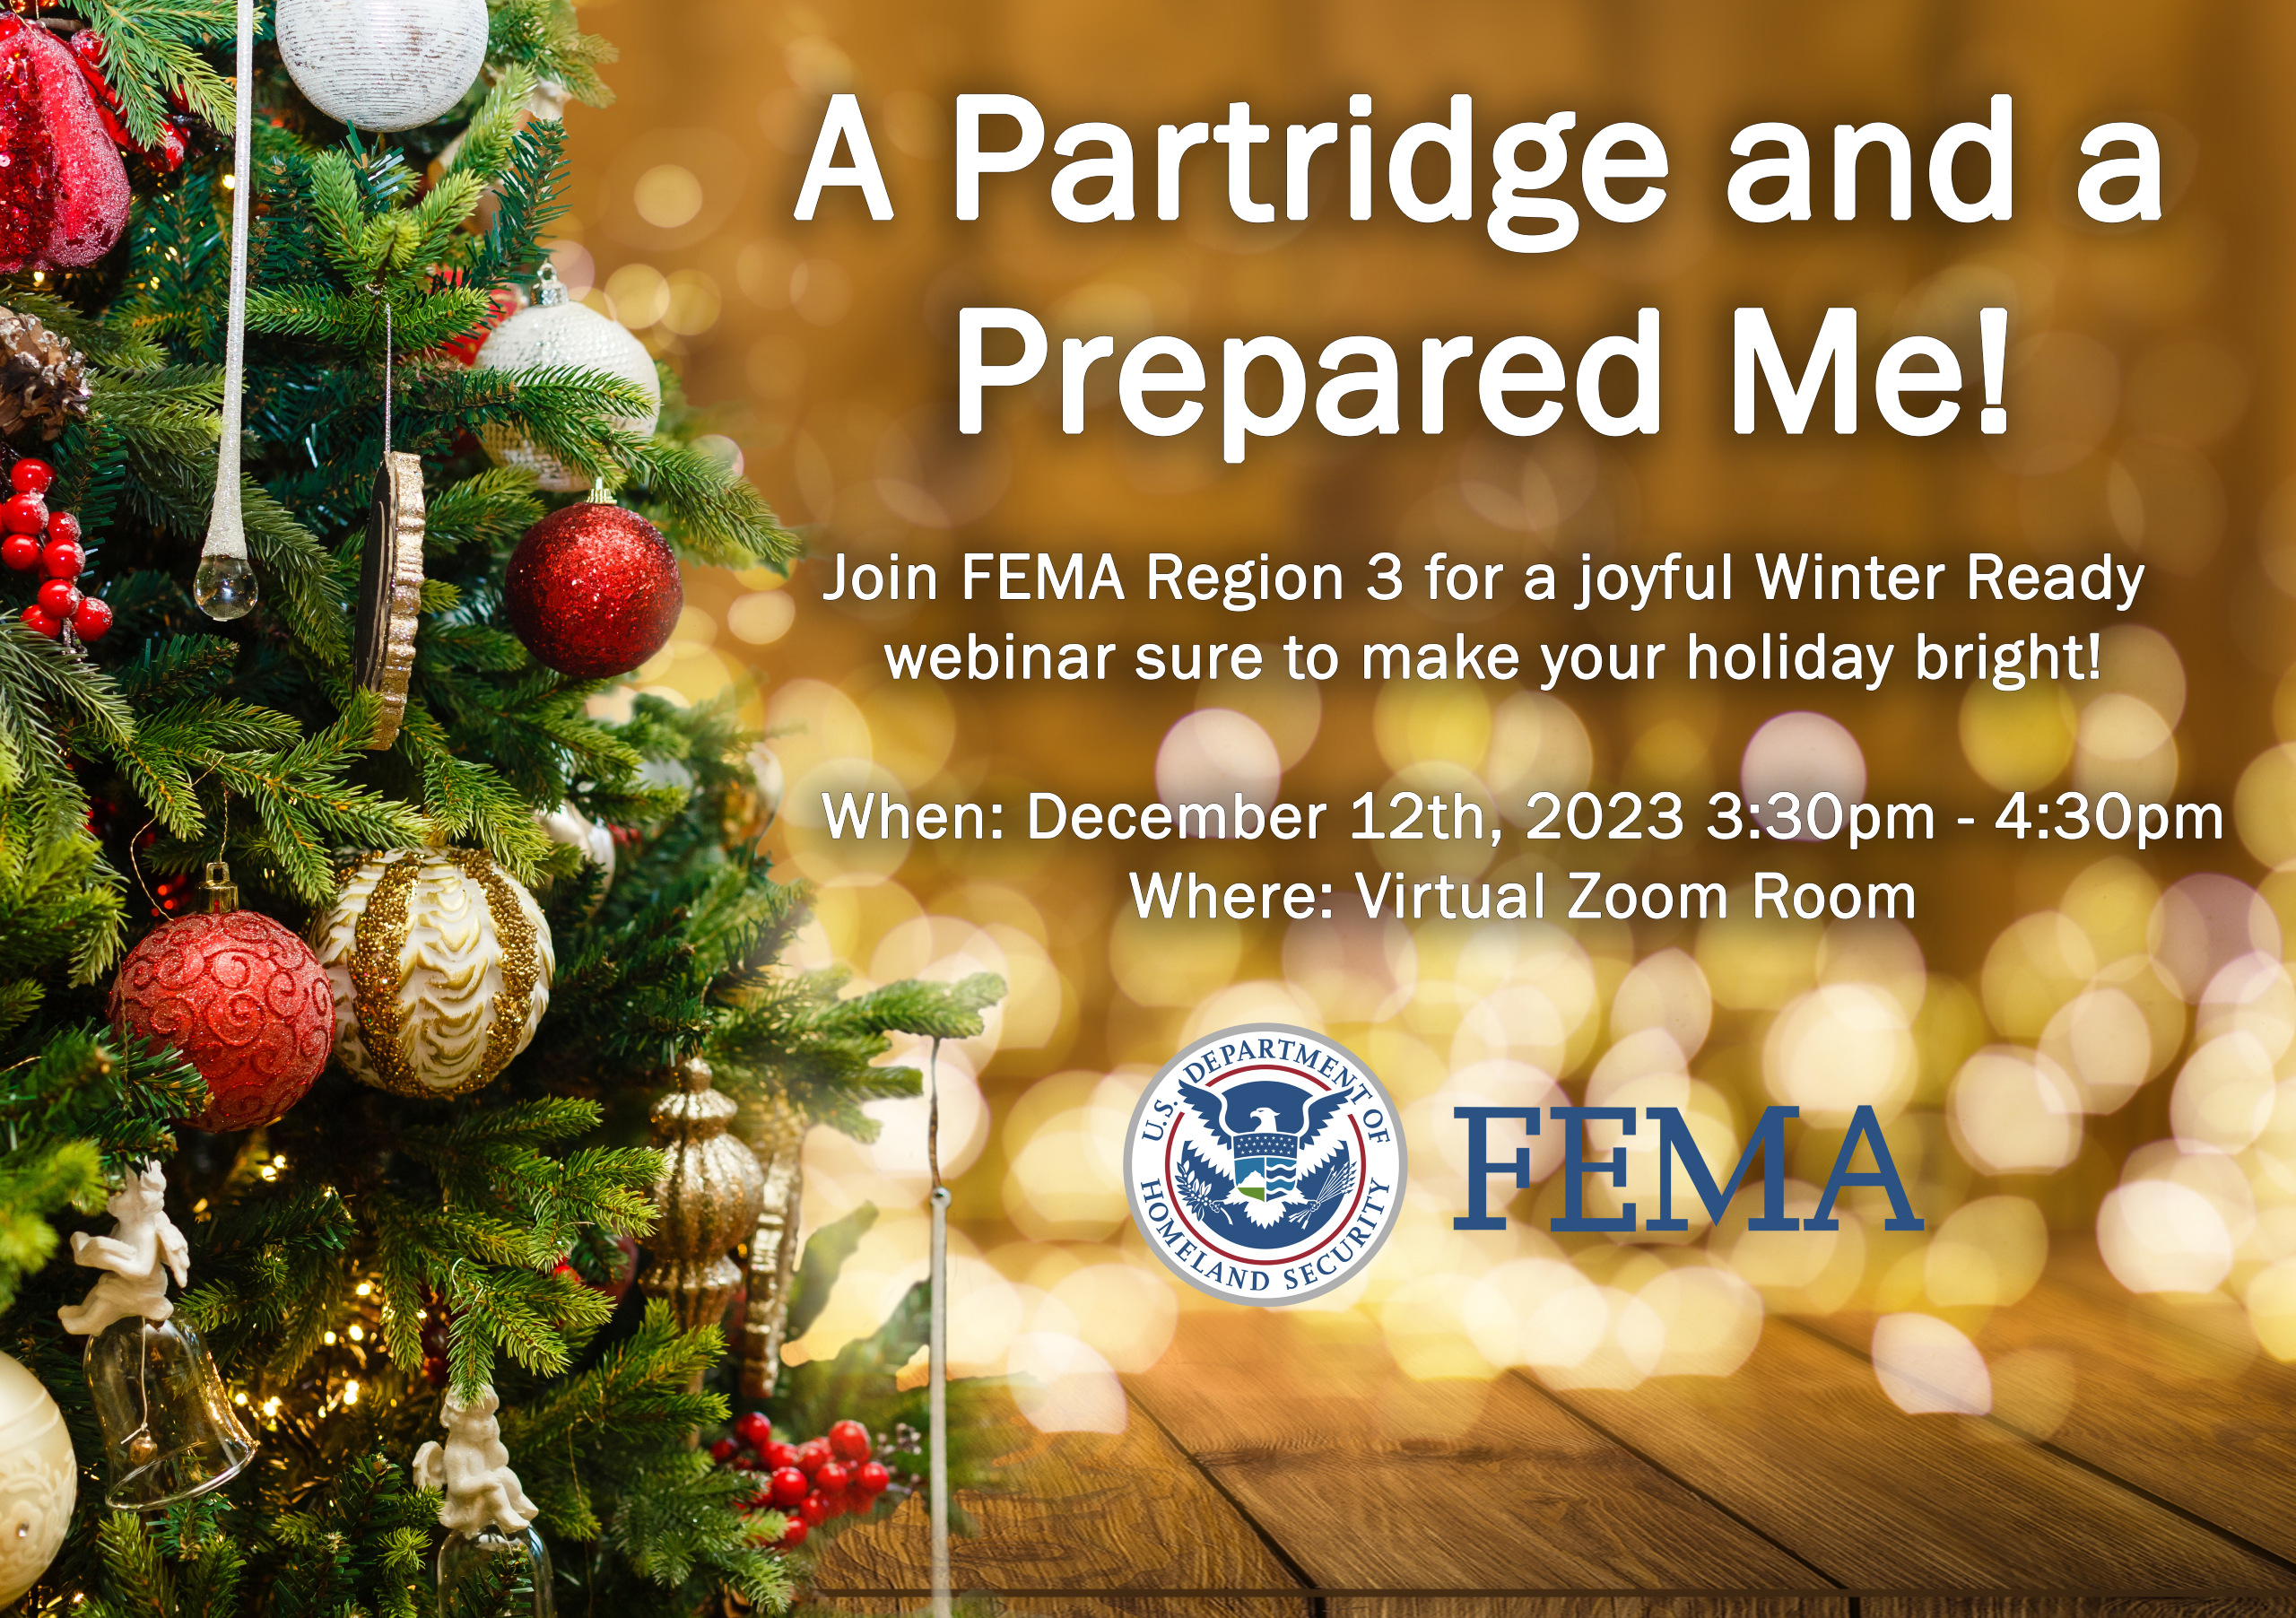 A partridge and a prepared me photo of christmas tree and lights fema logo. Text says join fema region 3 for a joyful winter ready webinar sure to make your holiday bright! when december 12th 2023 3:30pm - 4:30pm where virtual zoom room